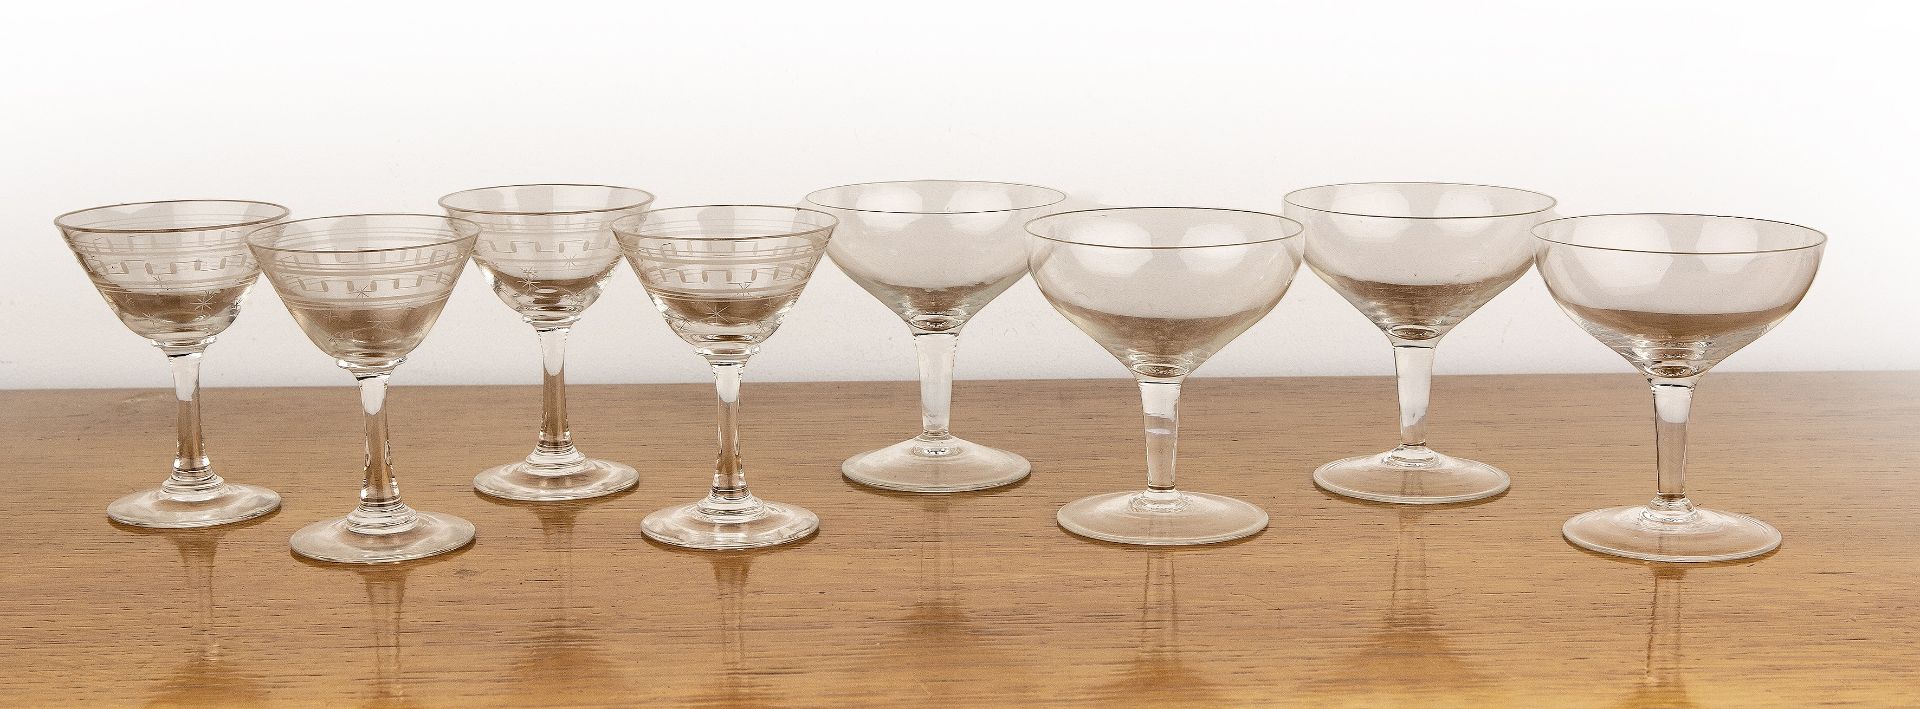 Collection of vintage glassware consisting of four etched glass cocktail glasses with Greek key